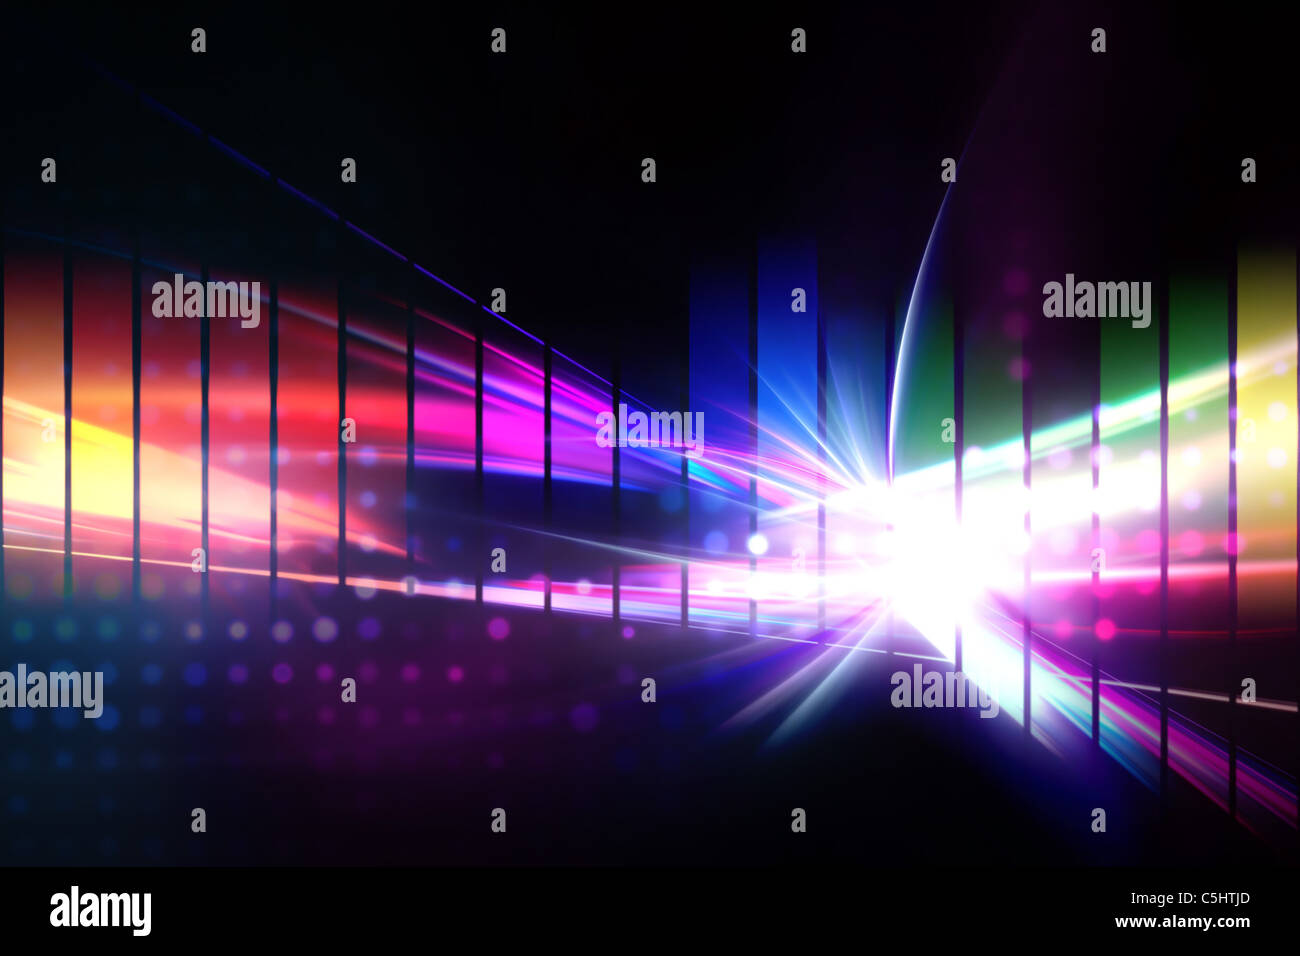 A rainbow graphic equalizer design that works great as a background or backdrop. Stock Photo